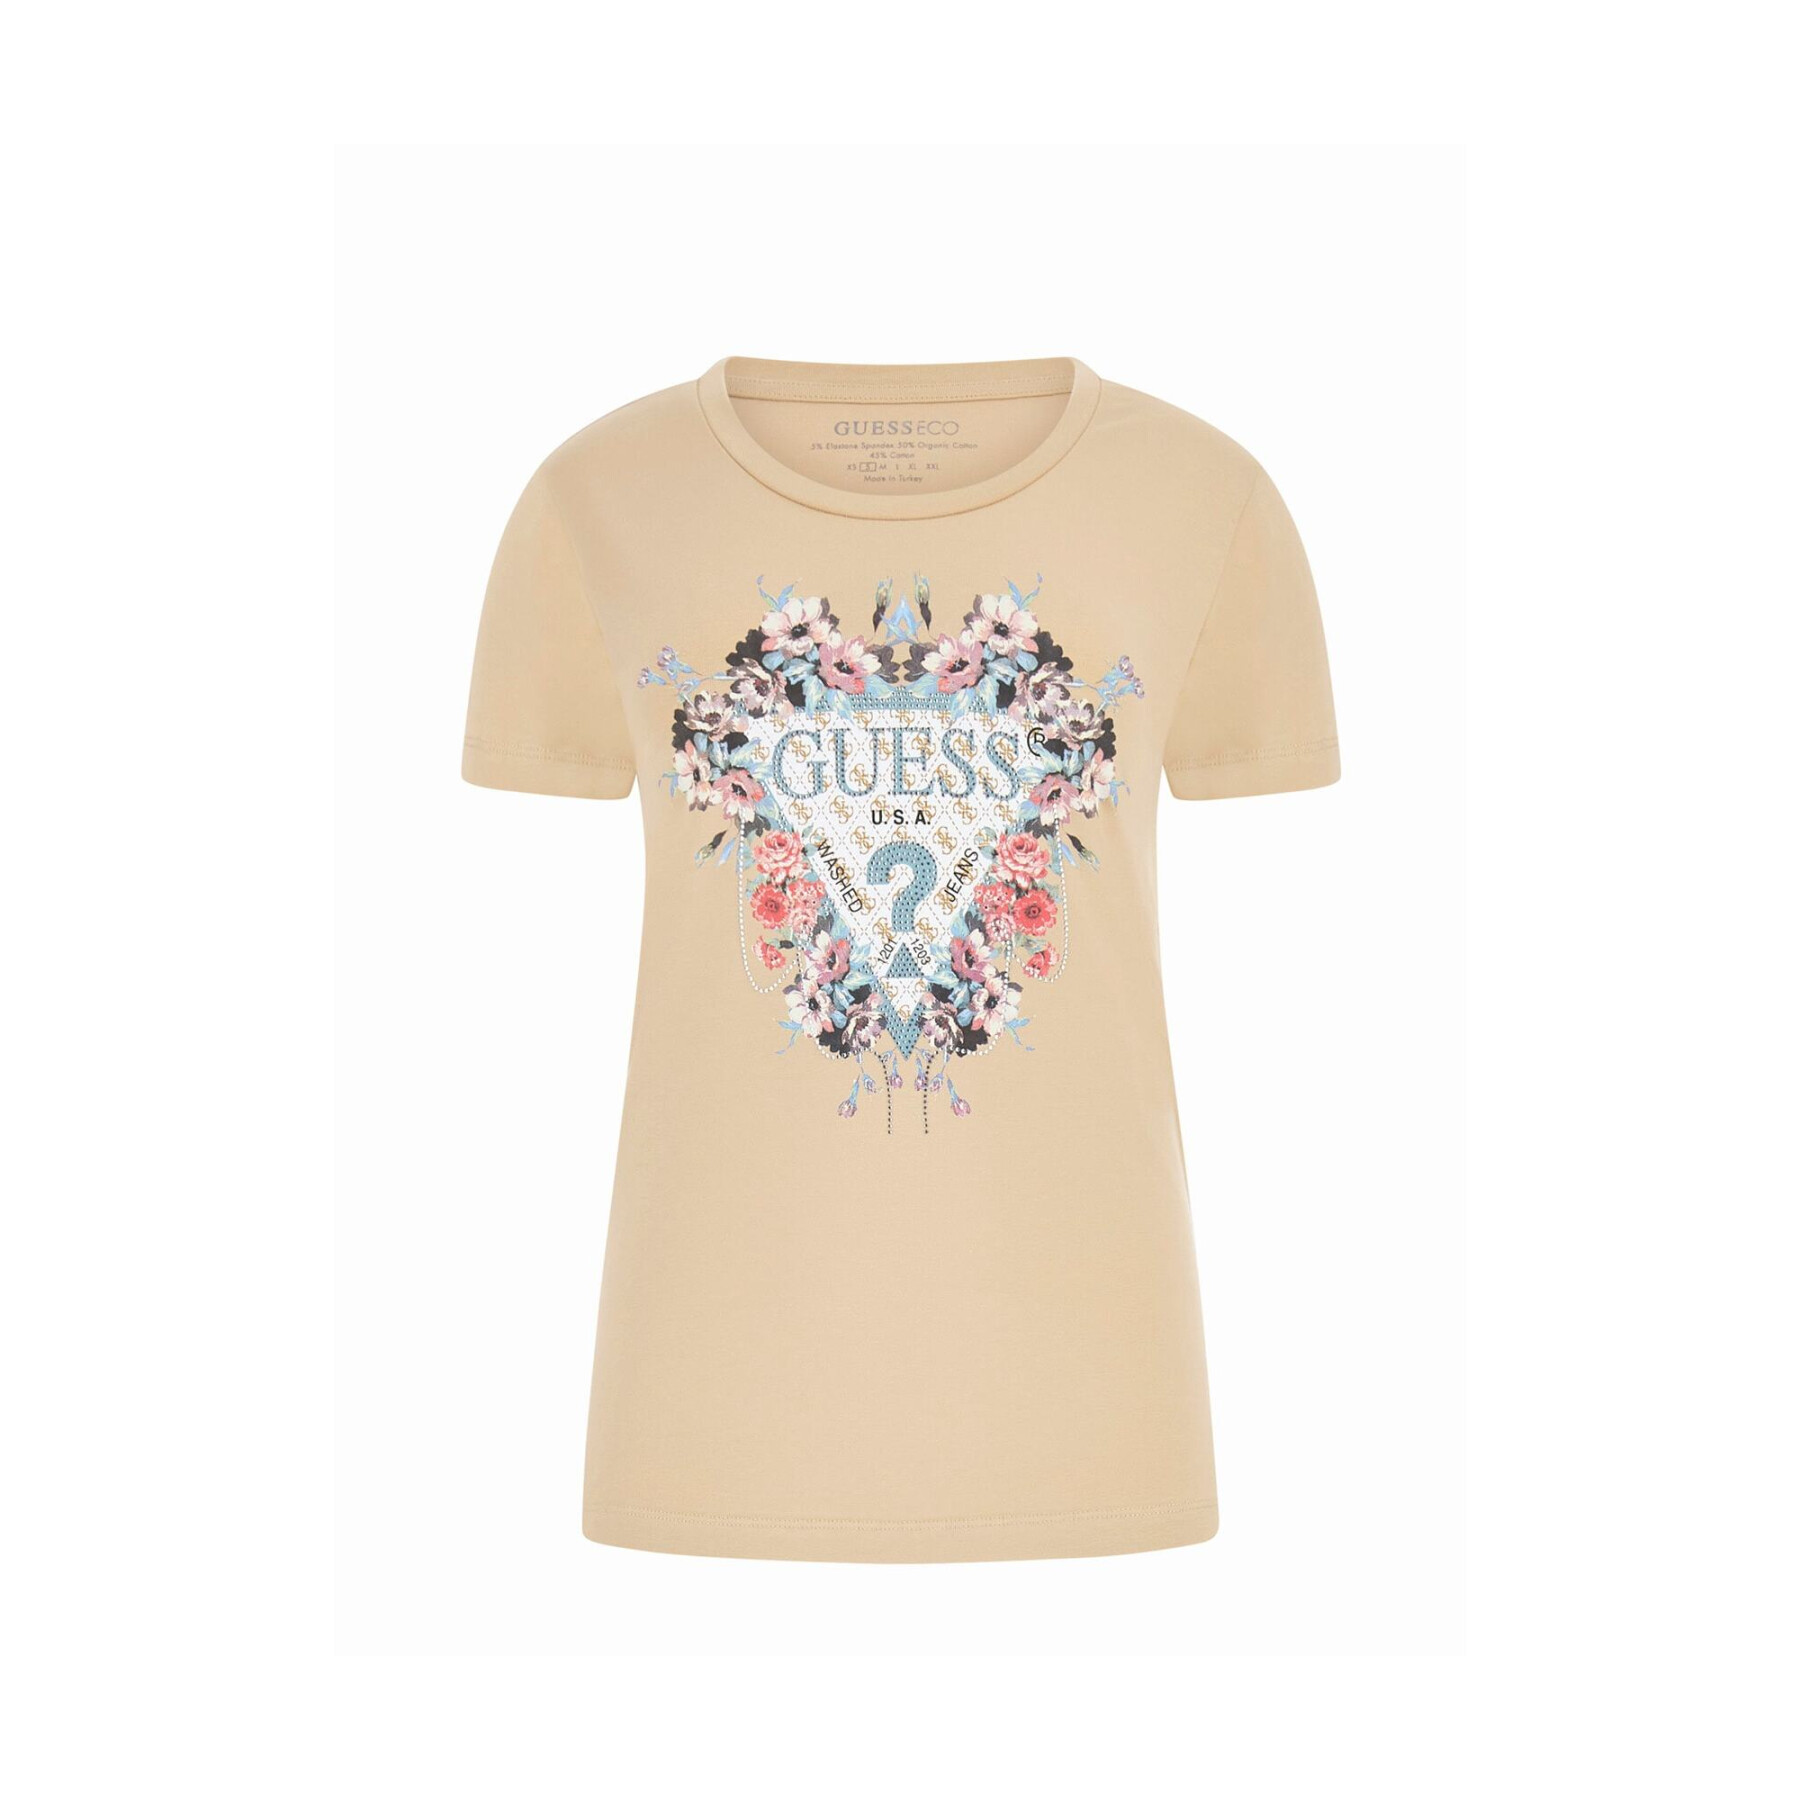 T-shirt femme Guess Floral Triangle